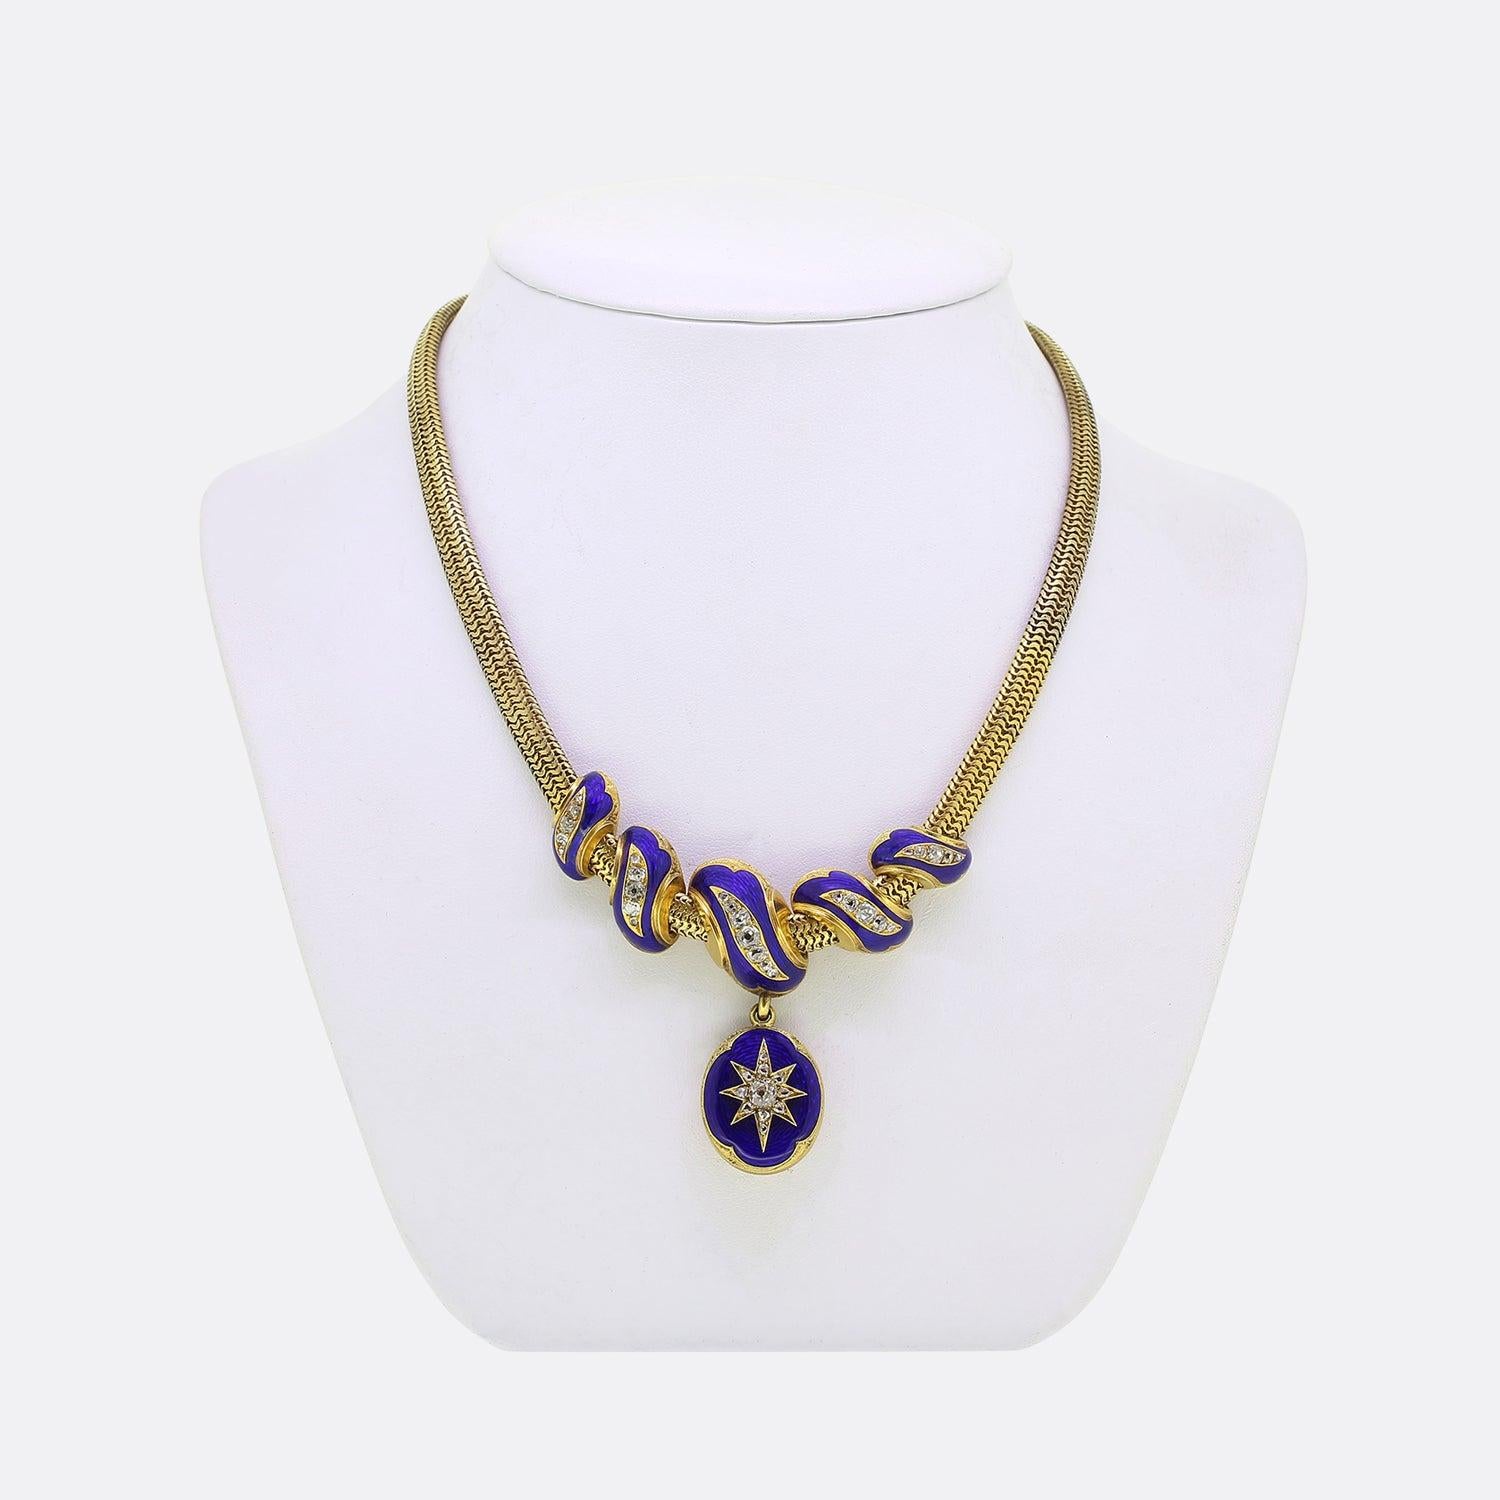 This is a truly wonderful statement necklace from the Victorian era. Suspended from a wide pierced 15ct yellow gold snake chain we find a quintuplet of individual swirling motifs which have been threaded through the centre and hang fixed at the